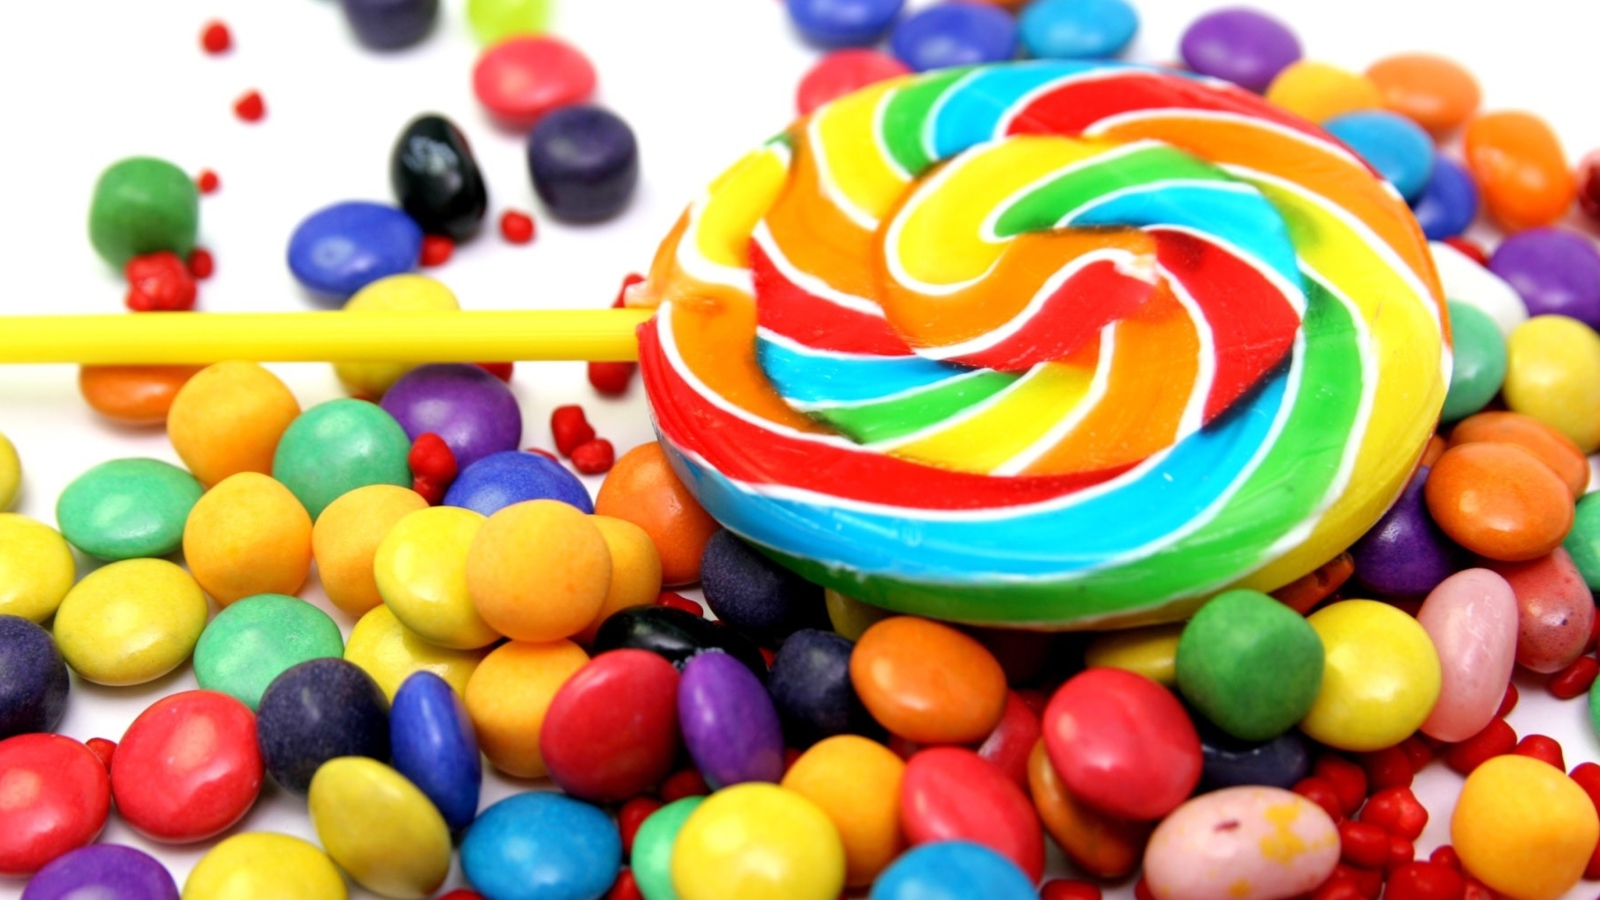 Colorful Candies wallpaper 1600x900